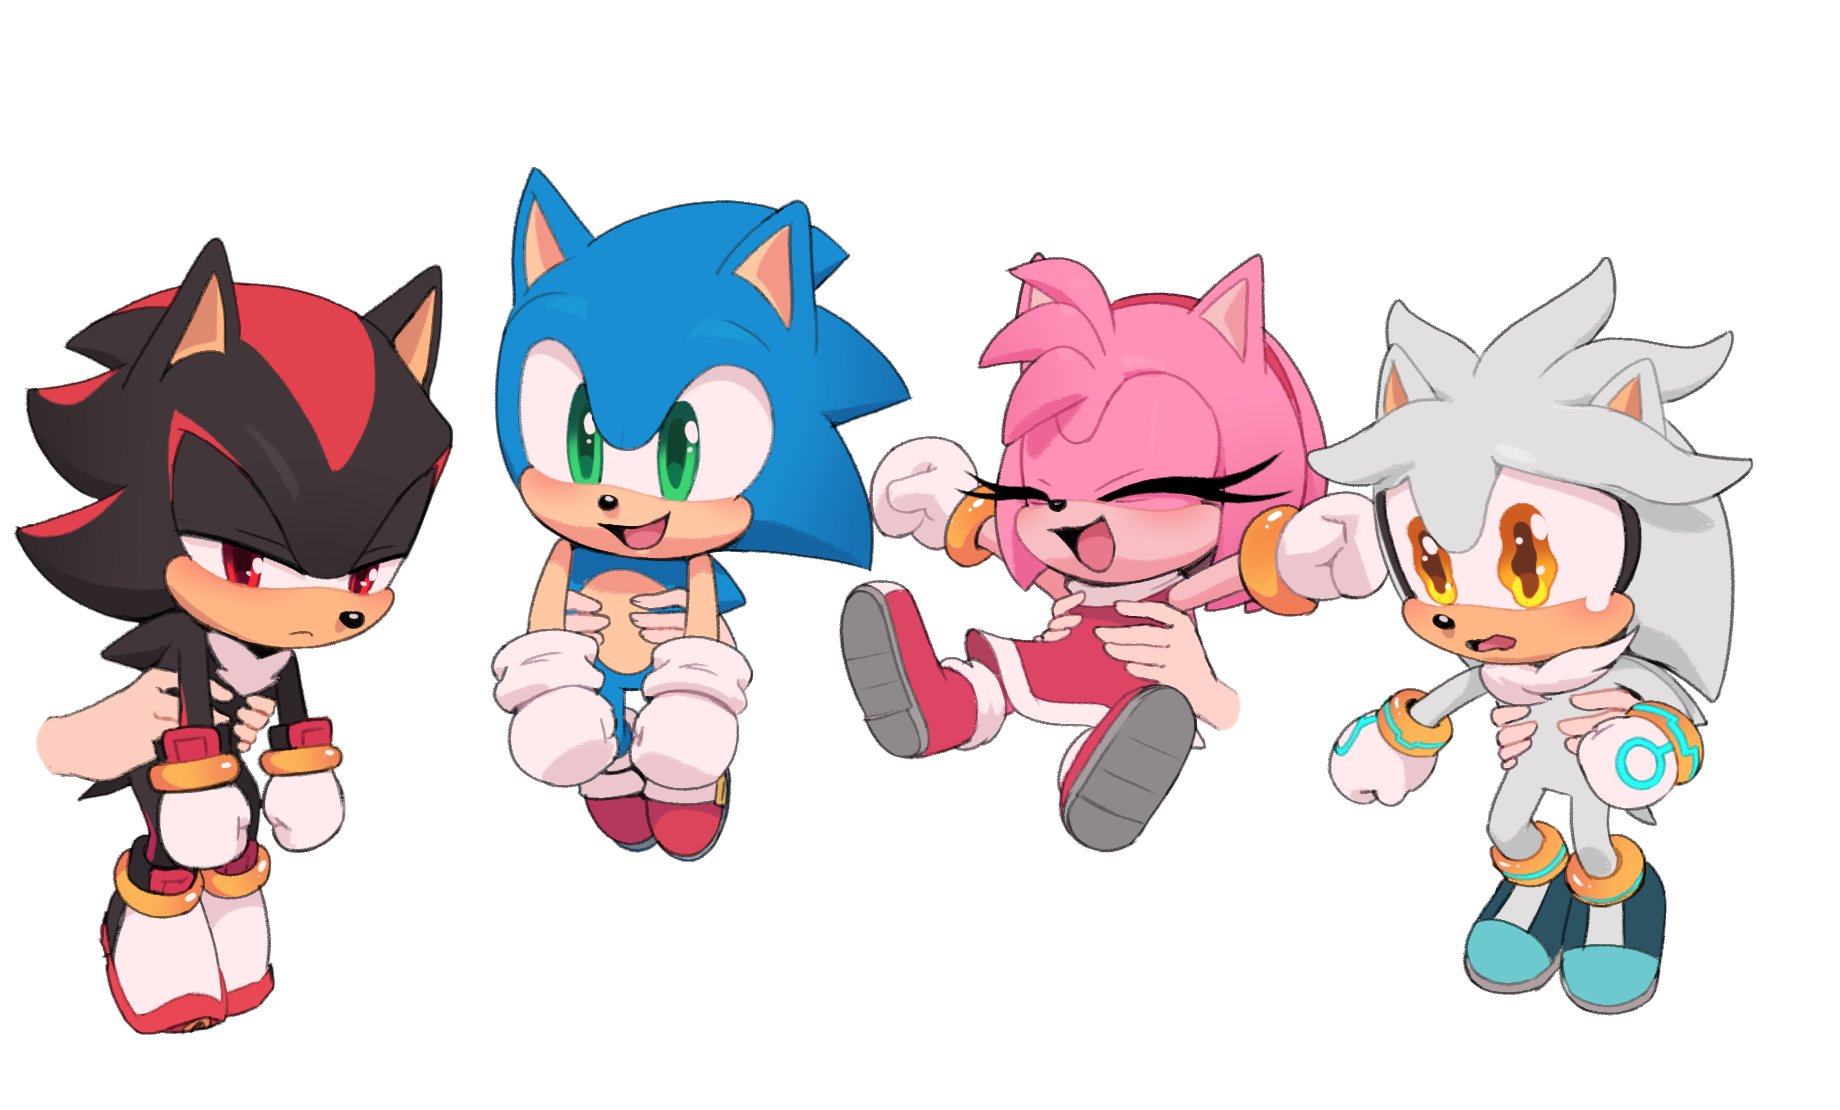 sonic the hedgehog, amy rose, shadow the hedgehog, and silver the